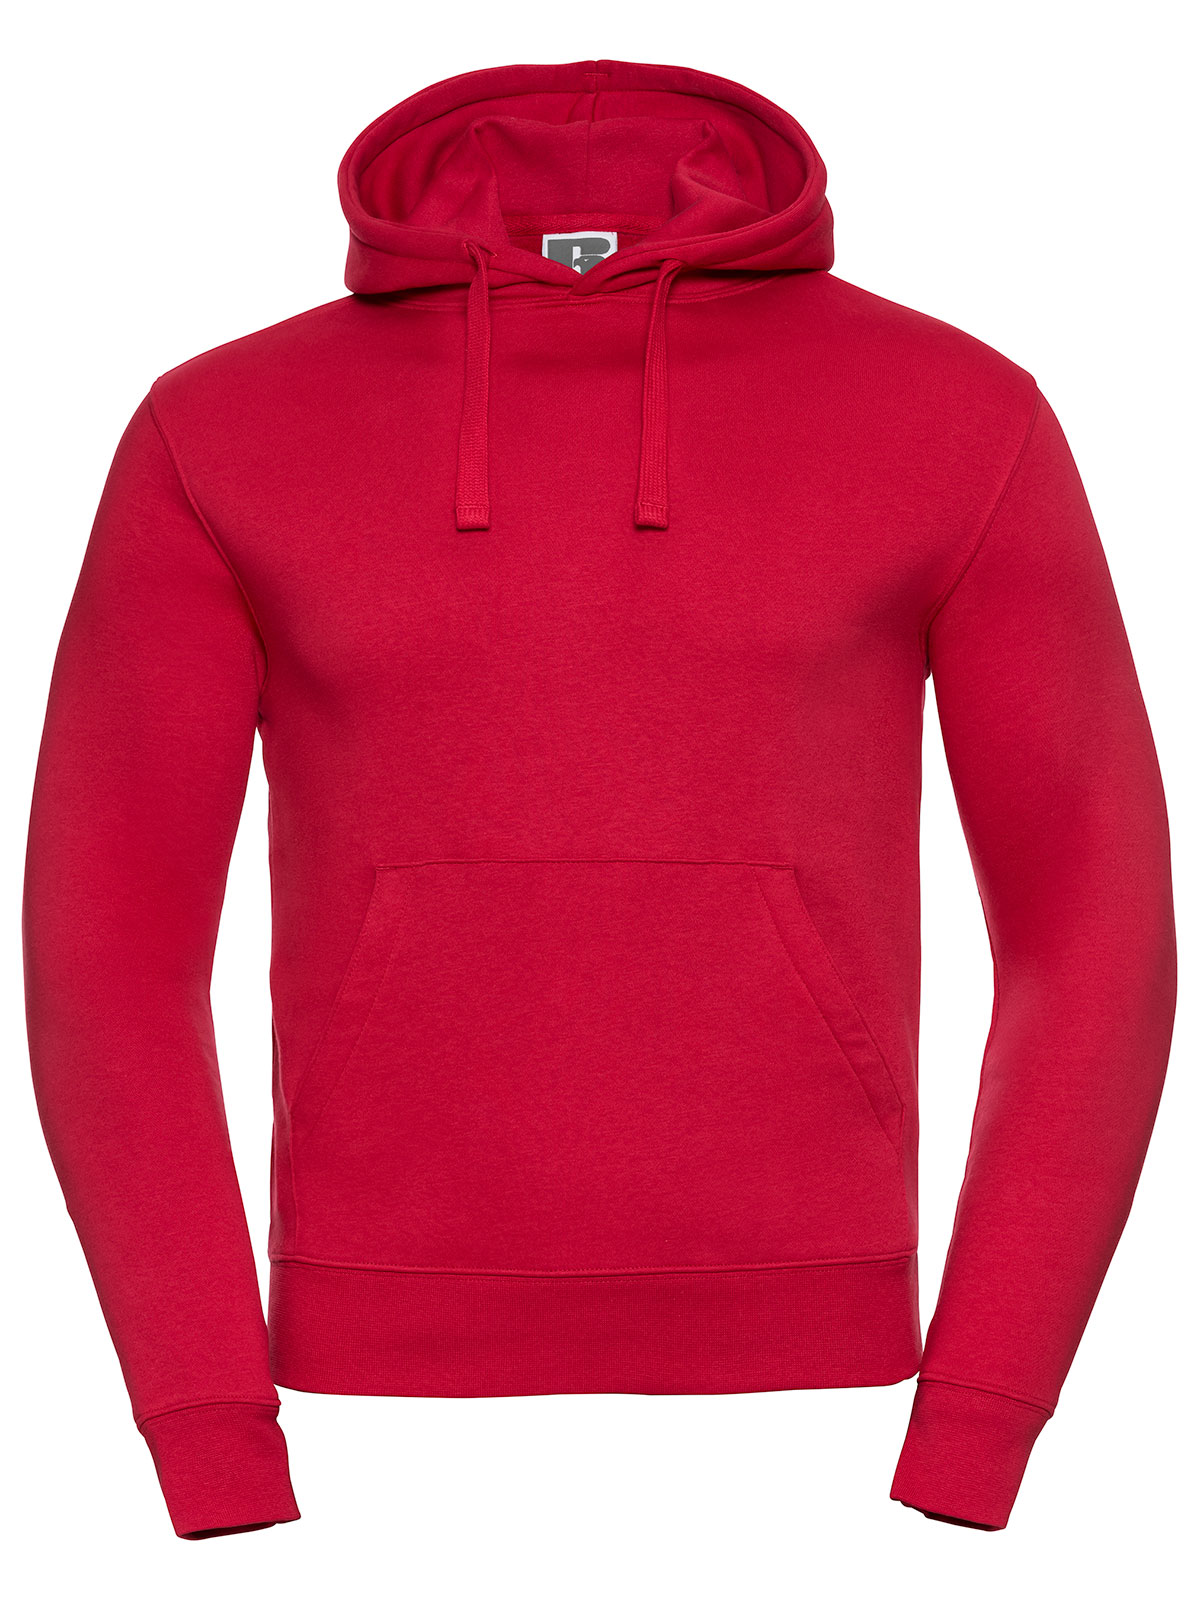 mens-authentic-hooded-sweat-classic-red.webp